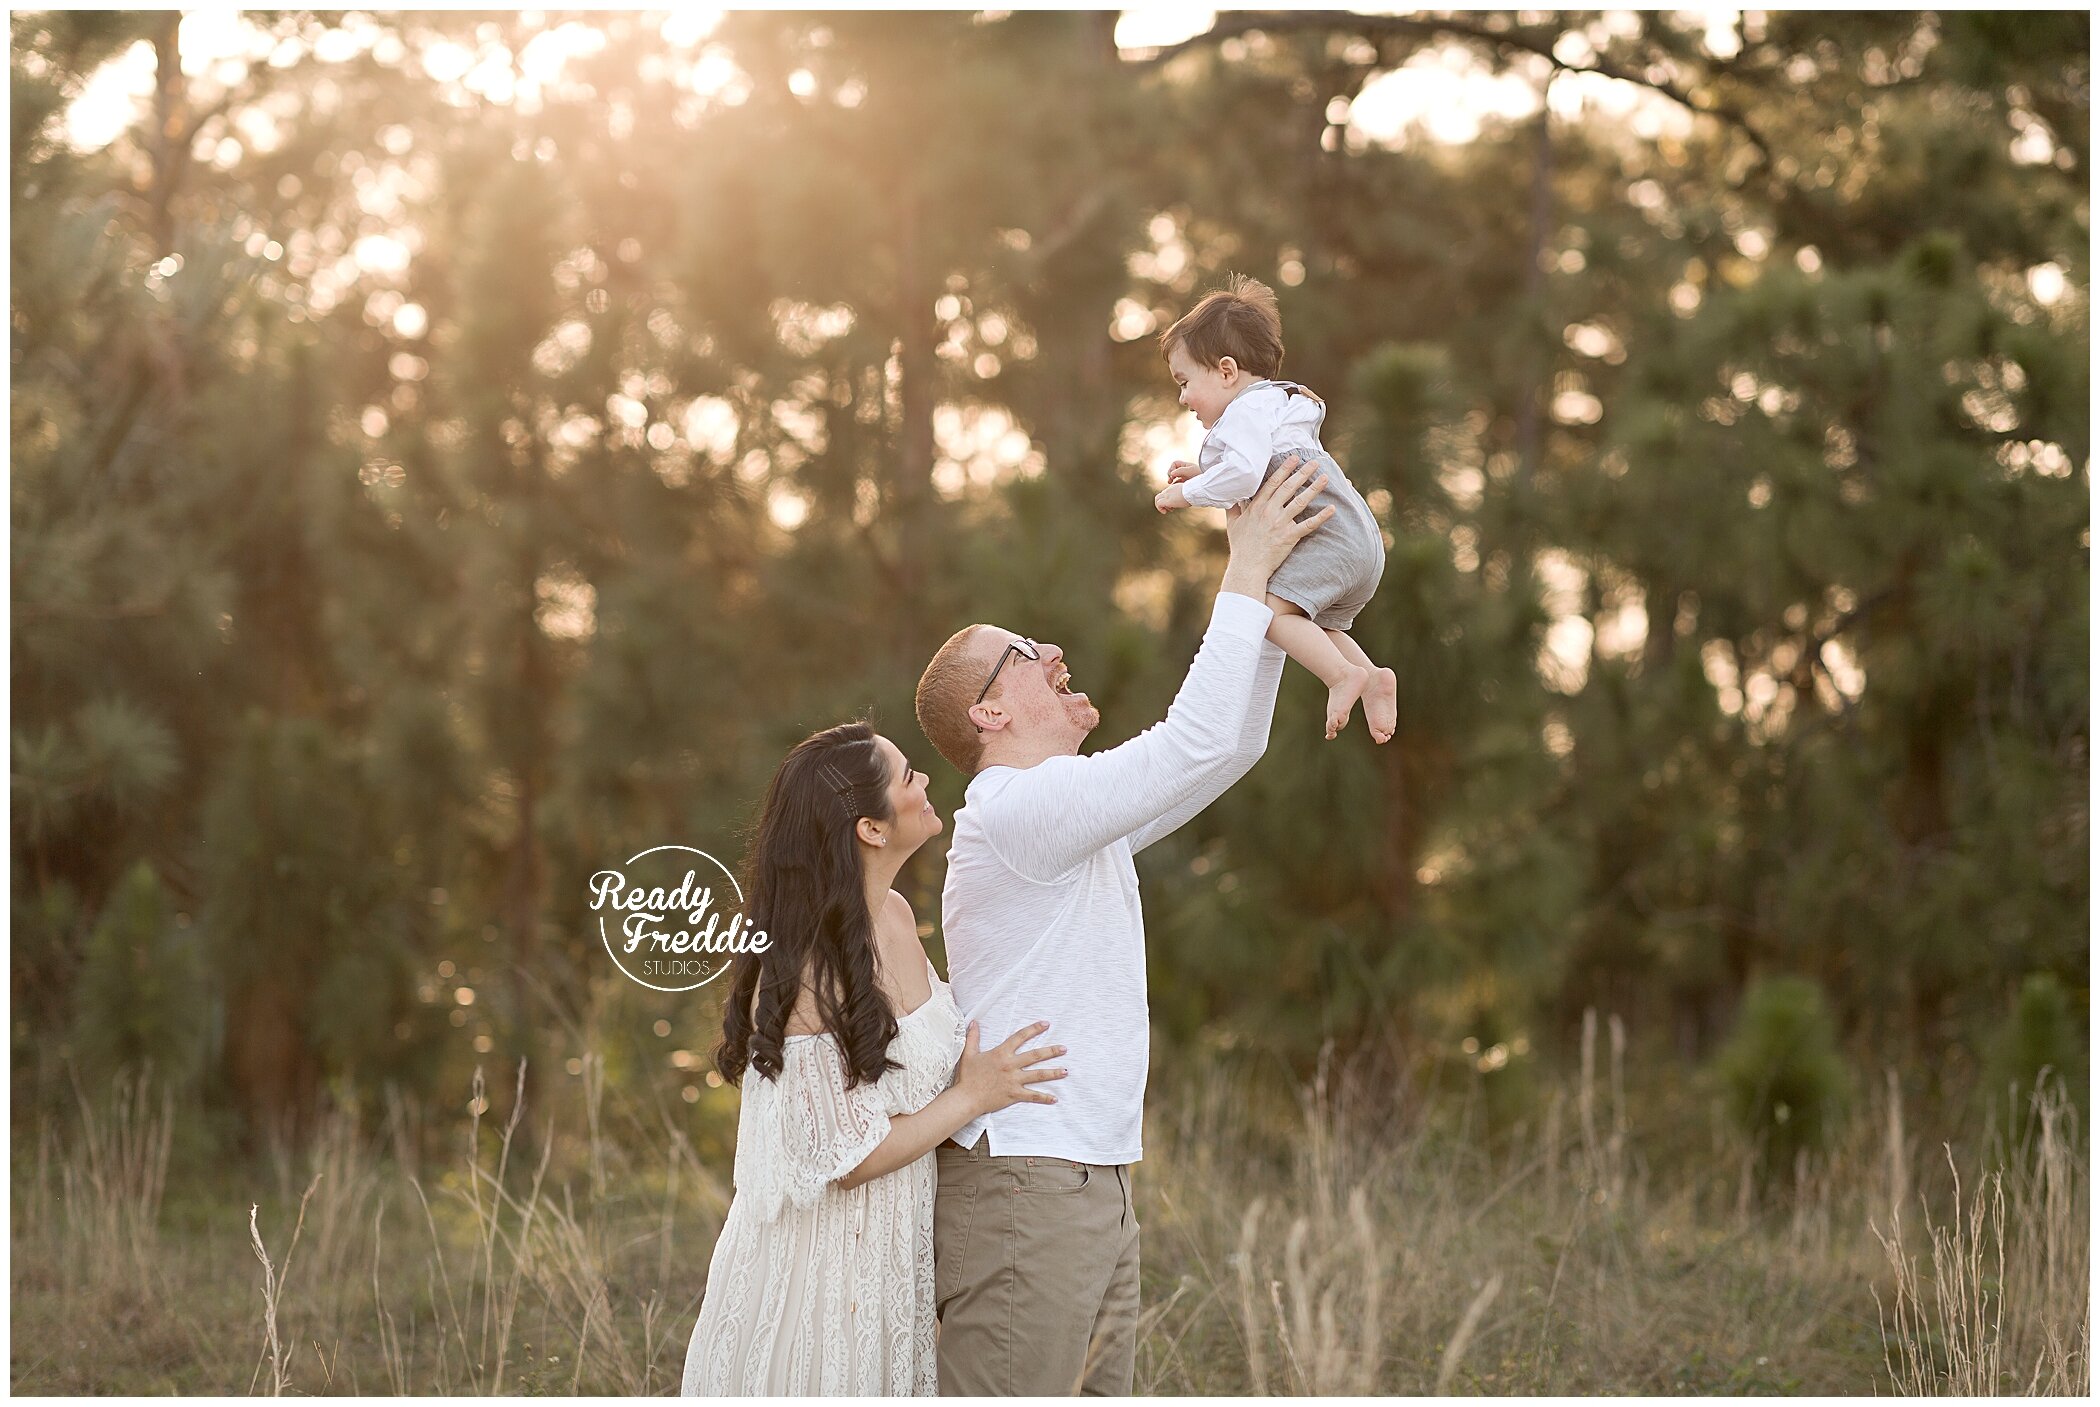 miami photography family session during sunset with Ready Freddie Studios 